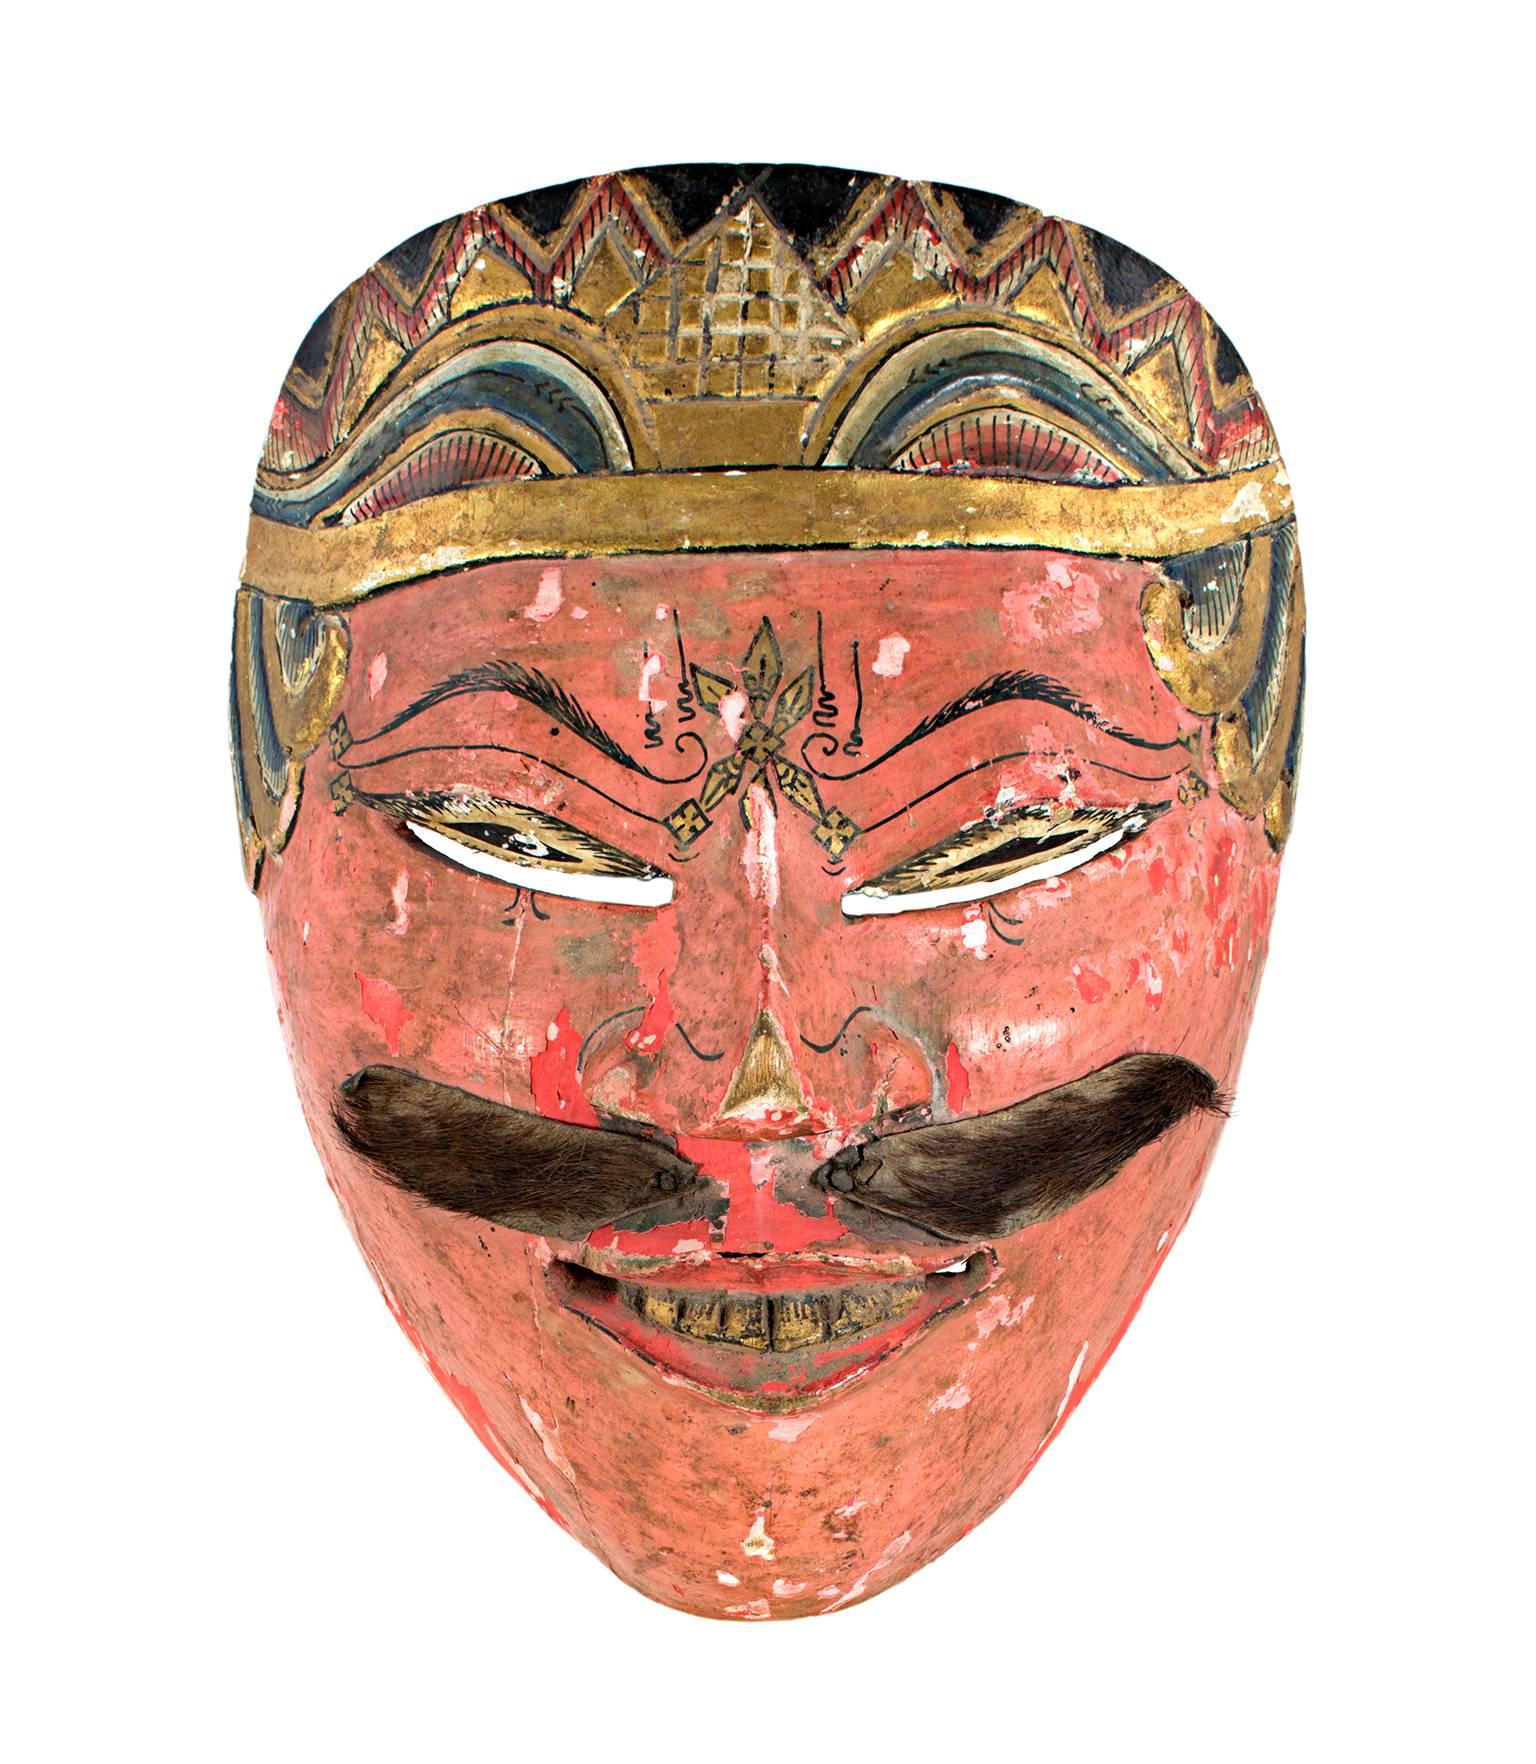 "Mask with Salmon-Colored Face and Slanted Eyes, " Wood & Fur Mustache, Indonesia - Sculpture by Unknown